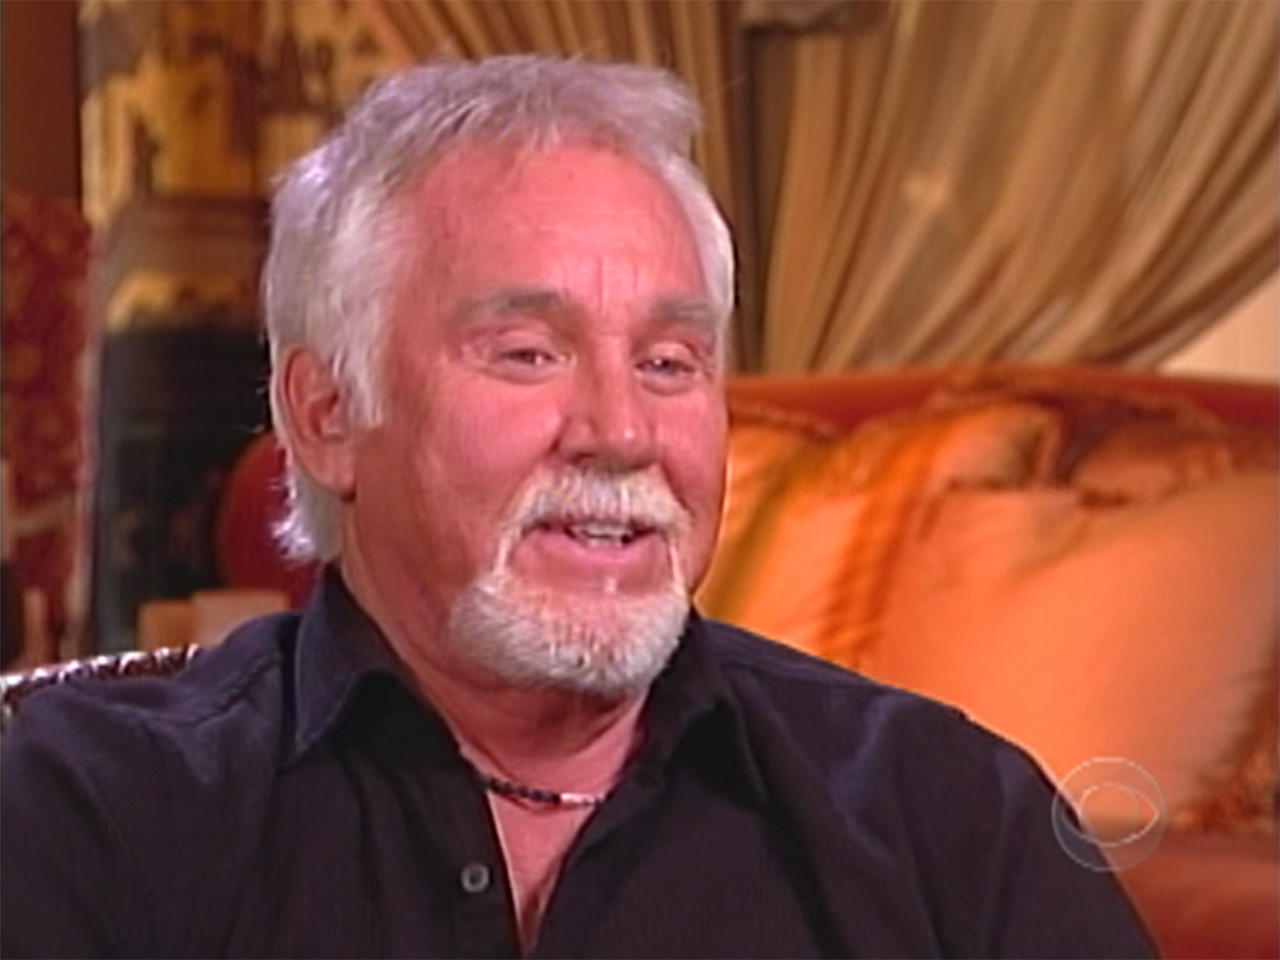 all music best of kenny rogers through the years 2006